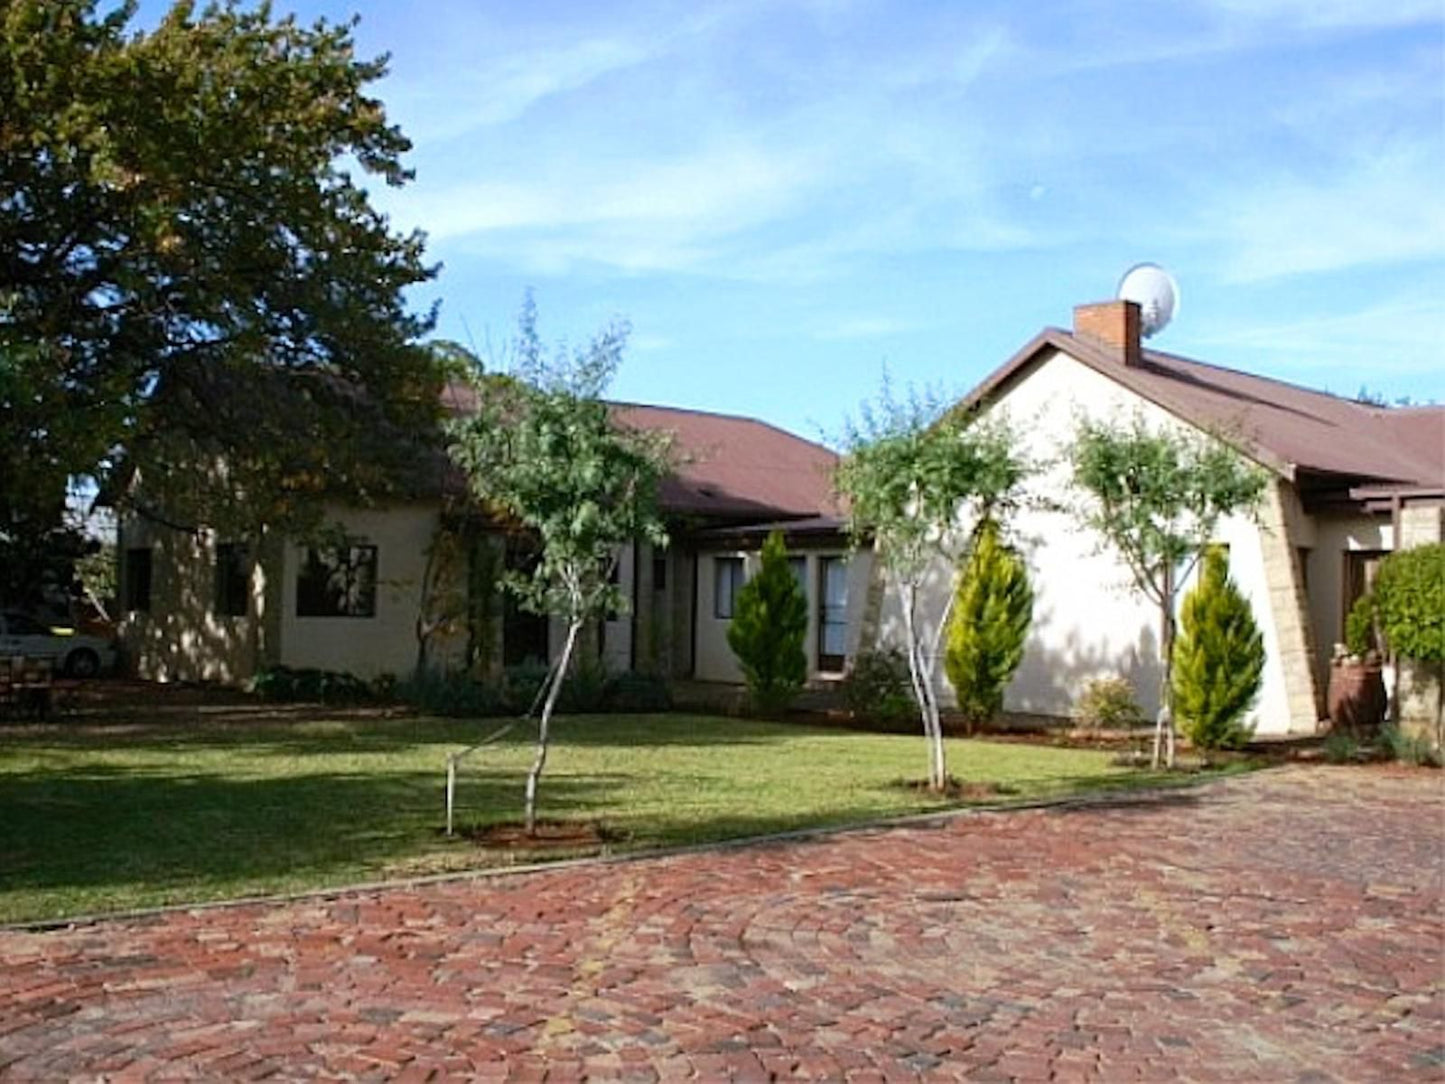 Oak Rest Bed And Breakfast Belgravia Kimberley Northern Cape South Africa Complementary Colors, House, Building, Architecture